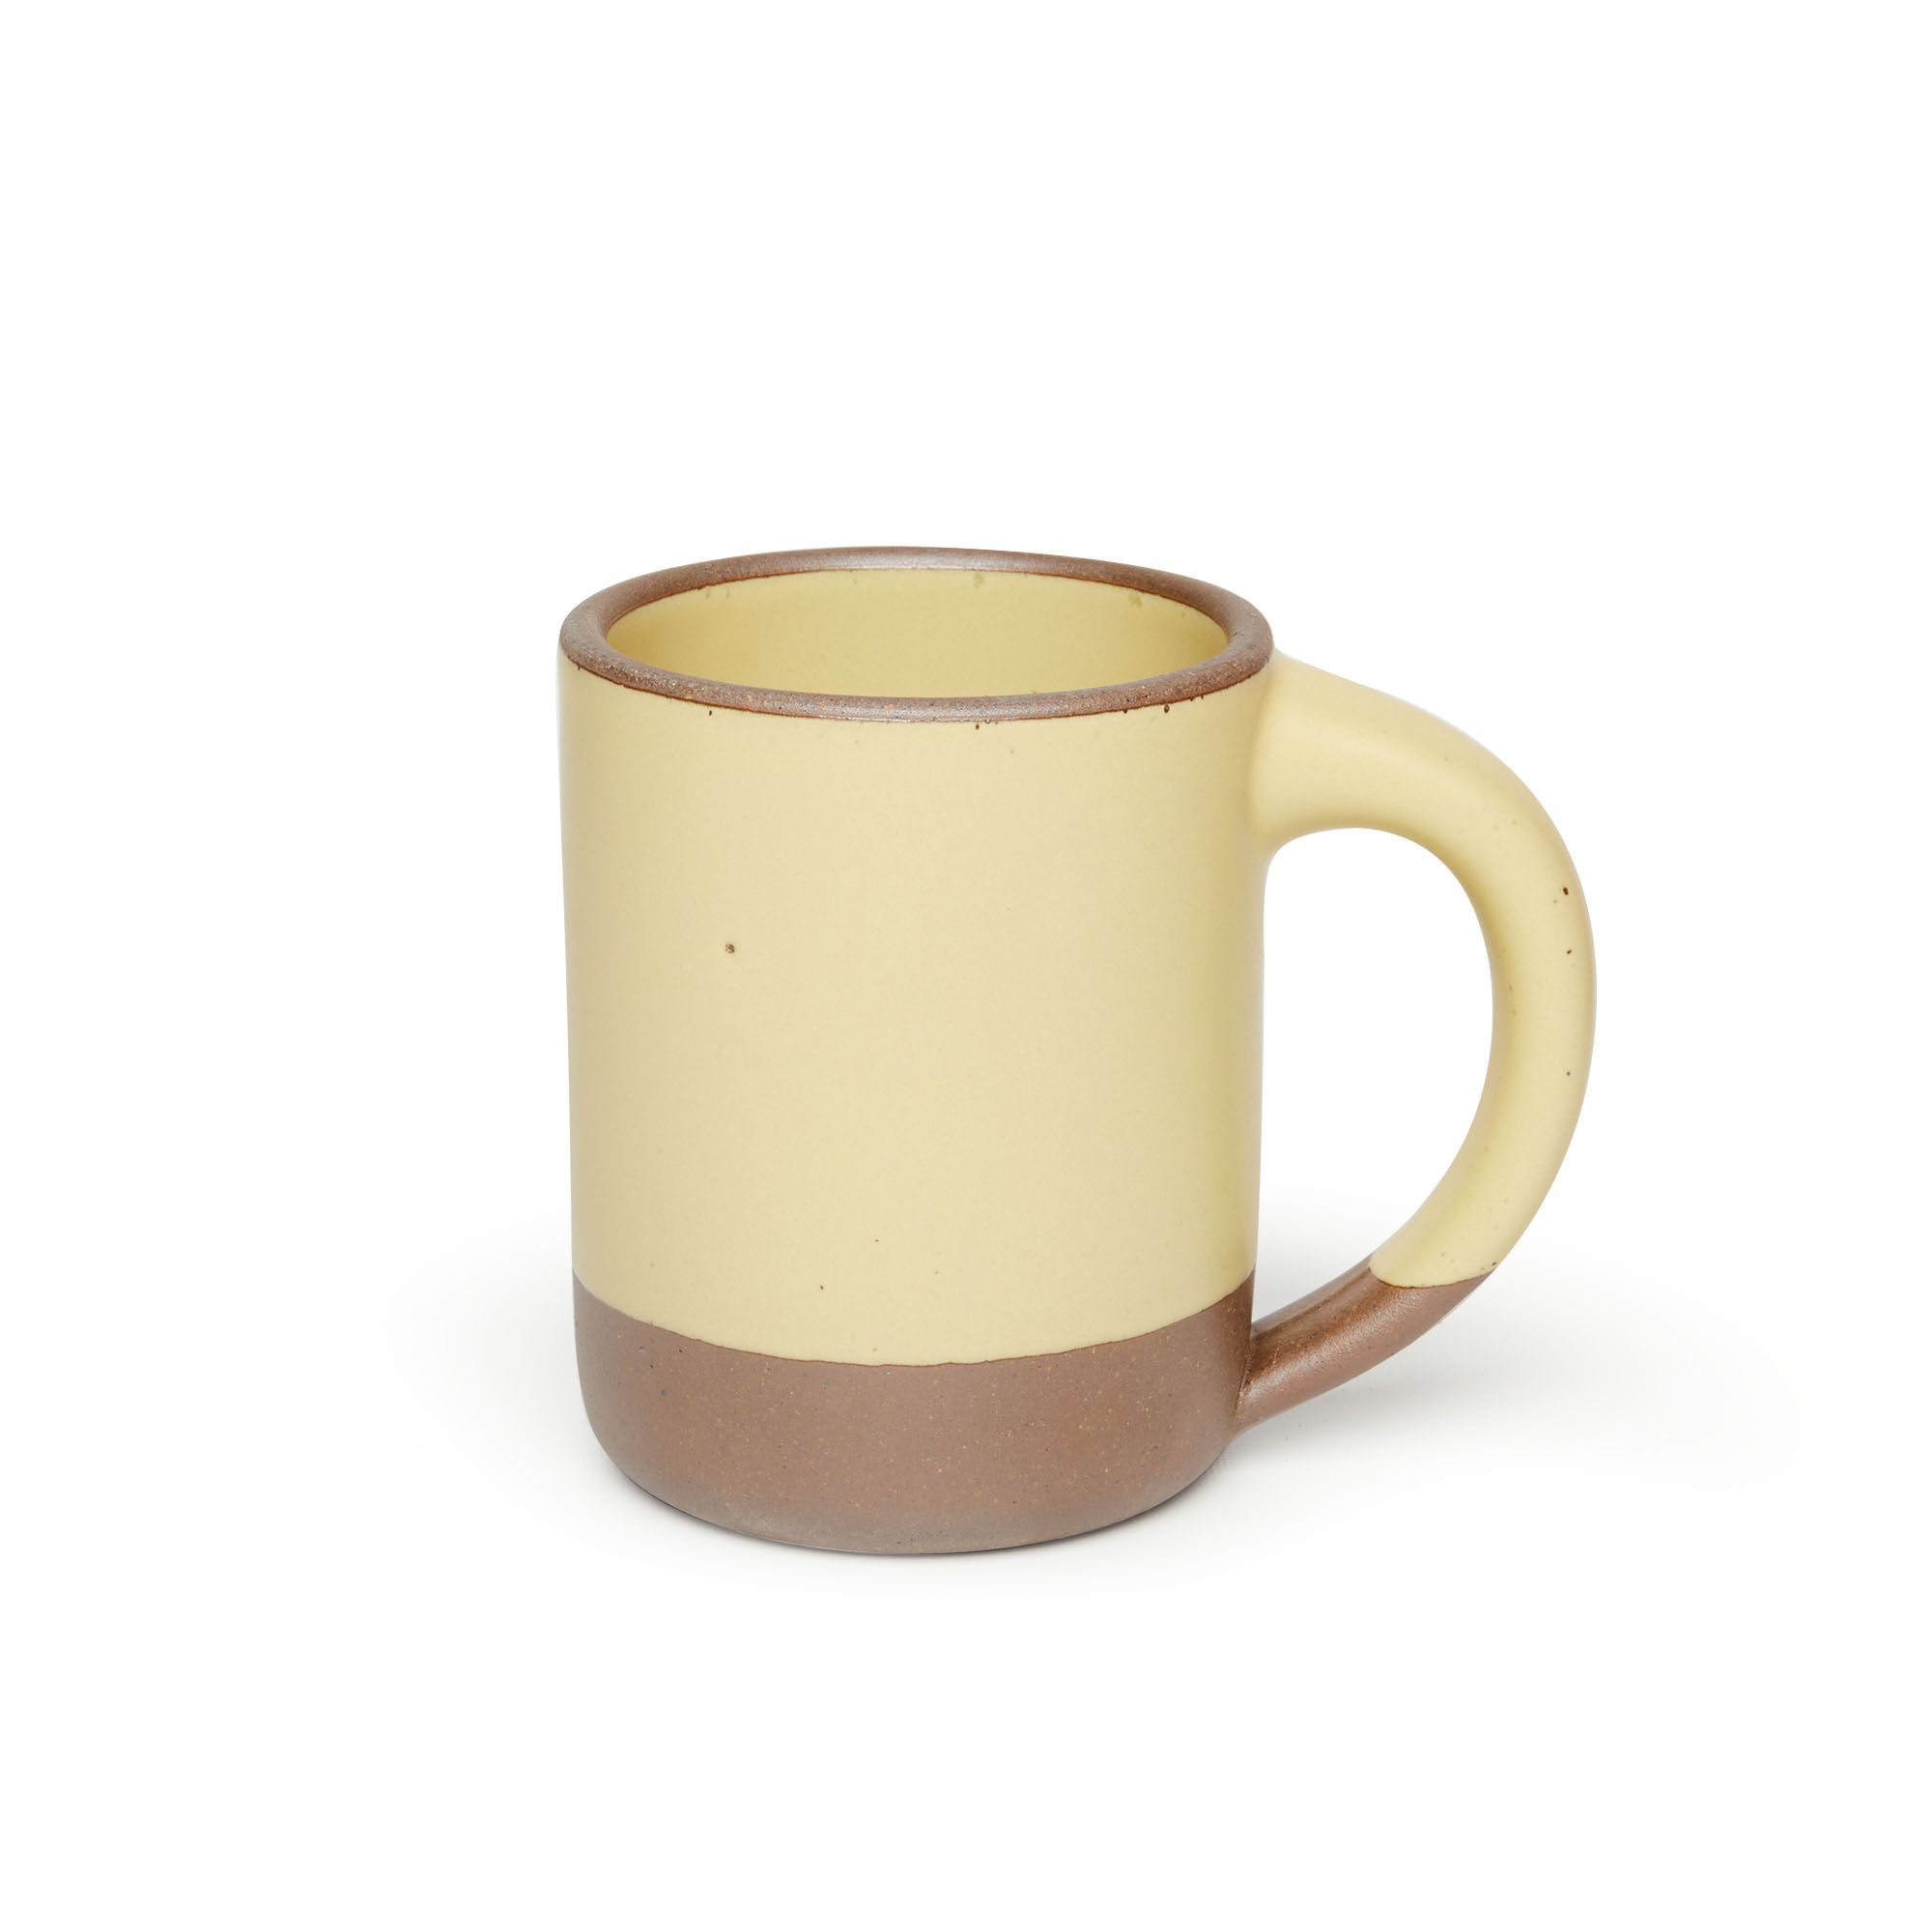 A big sized ceramic mug with handle in a light butter yellow glaze featuring iron speckles and unglazed rim and bottom base.